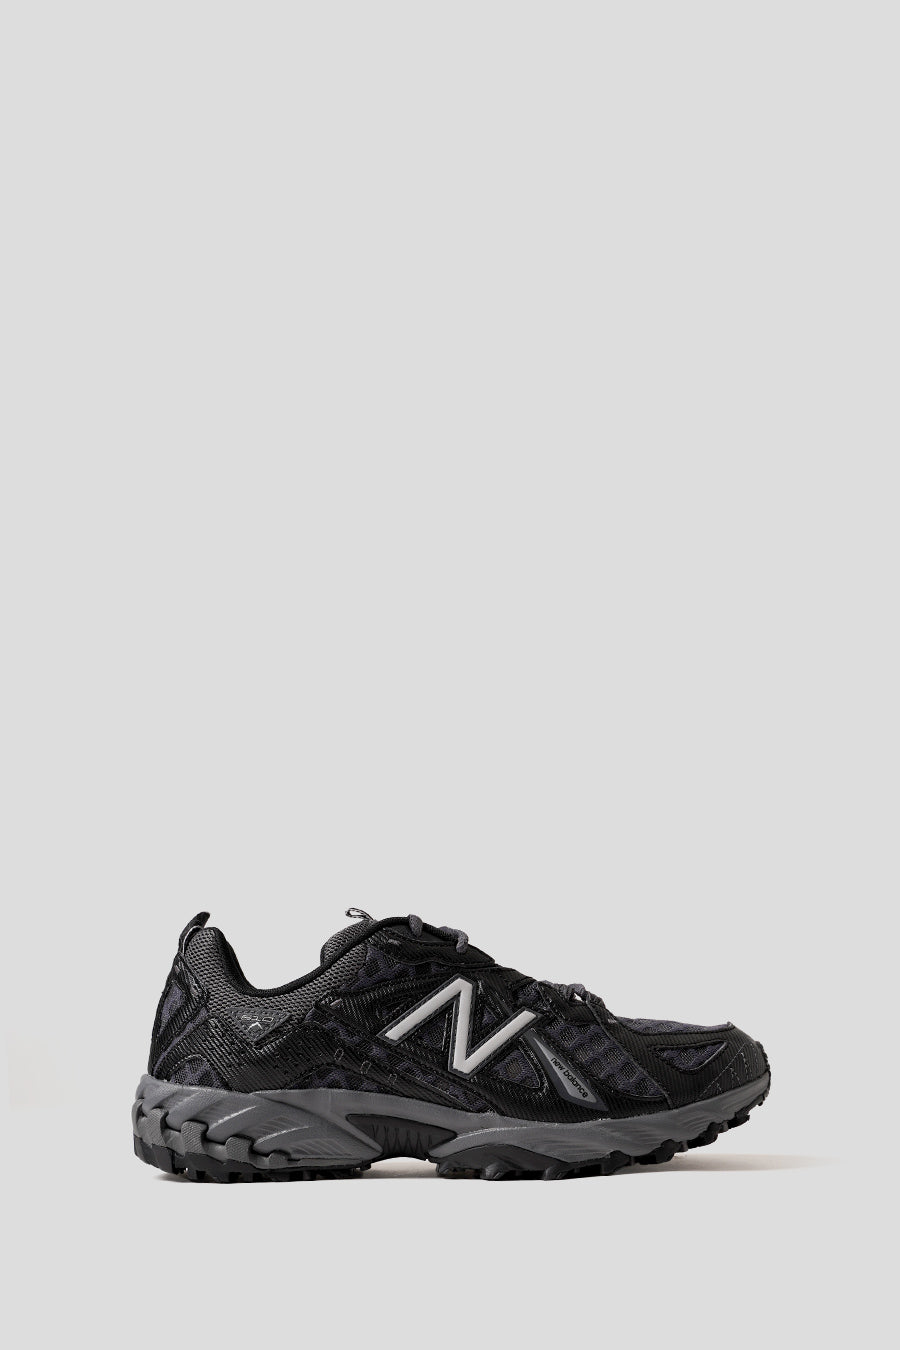 NEW BALANCE - MAGNET AND BLACK 610TV1 SNEAKERS - LE LABO STORE